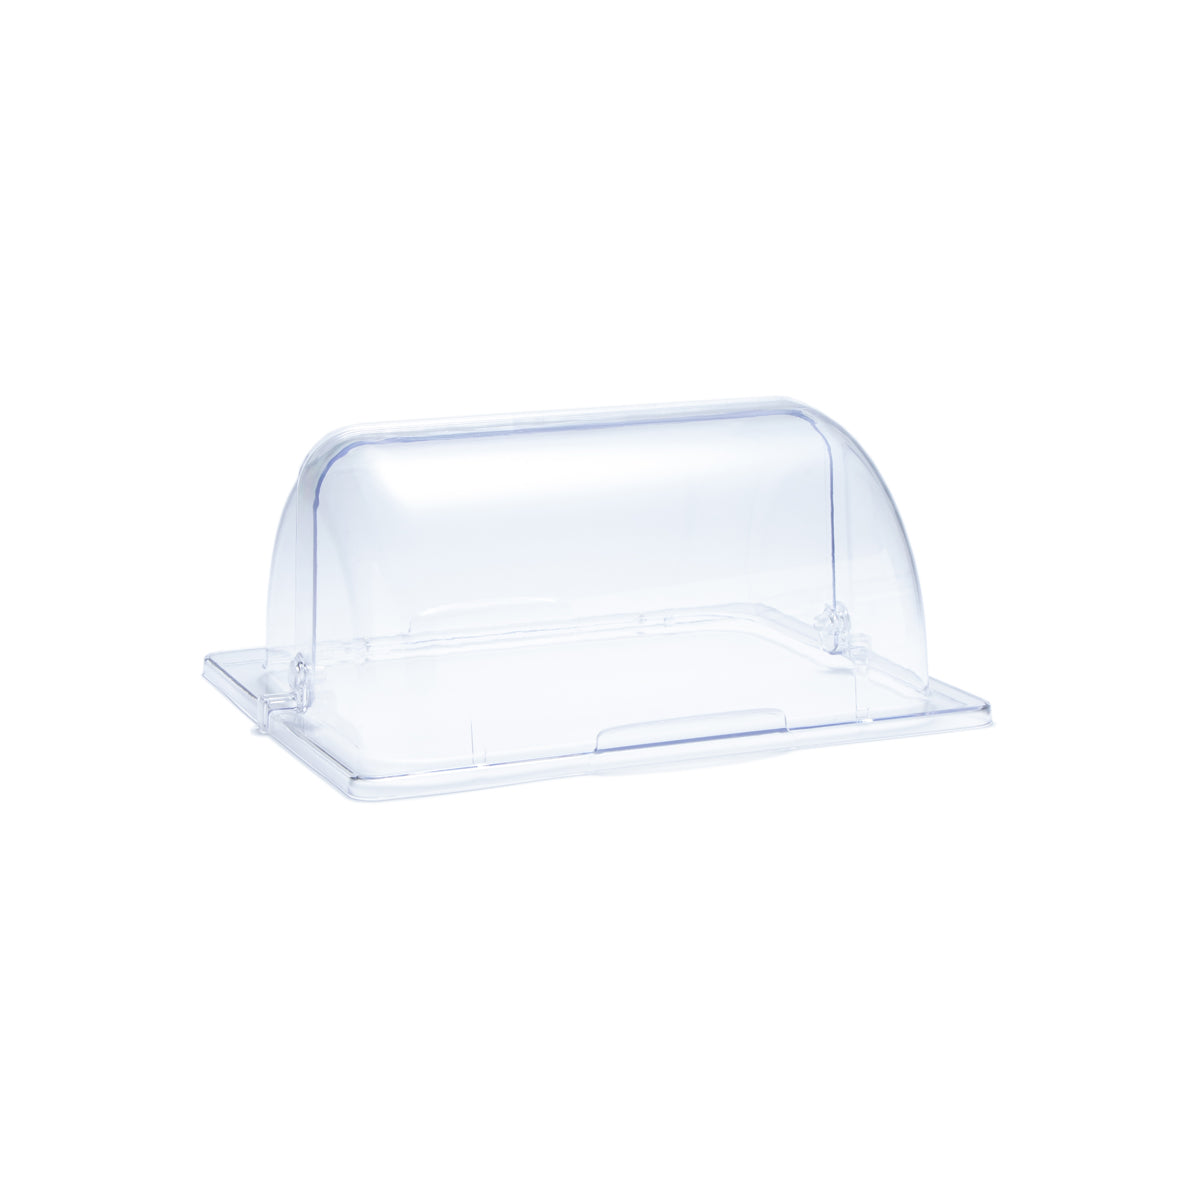 Food covers are essential to good temperature and hygiene control.  GN Gastronorm sizing roll-top design food cover enhances both side opening makes it convenient for for buffet service.  Specifically for Vidacasa® Universal buffetware equipment.  Made with durable clear plastics.  